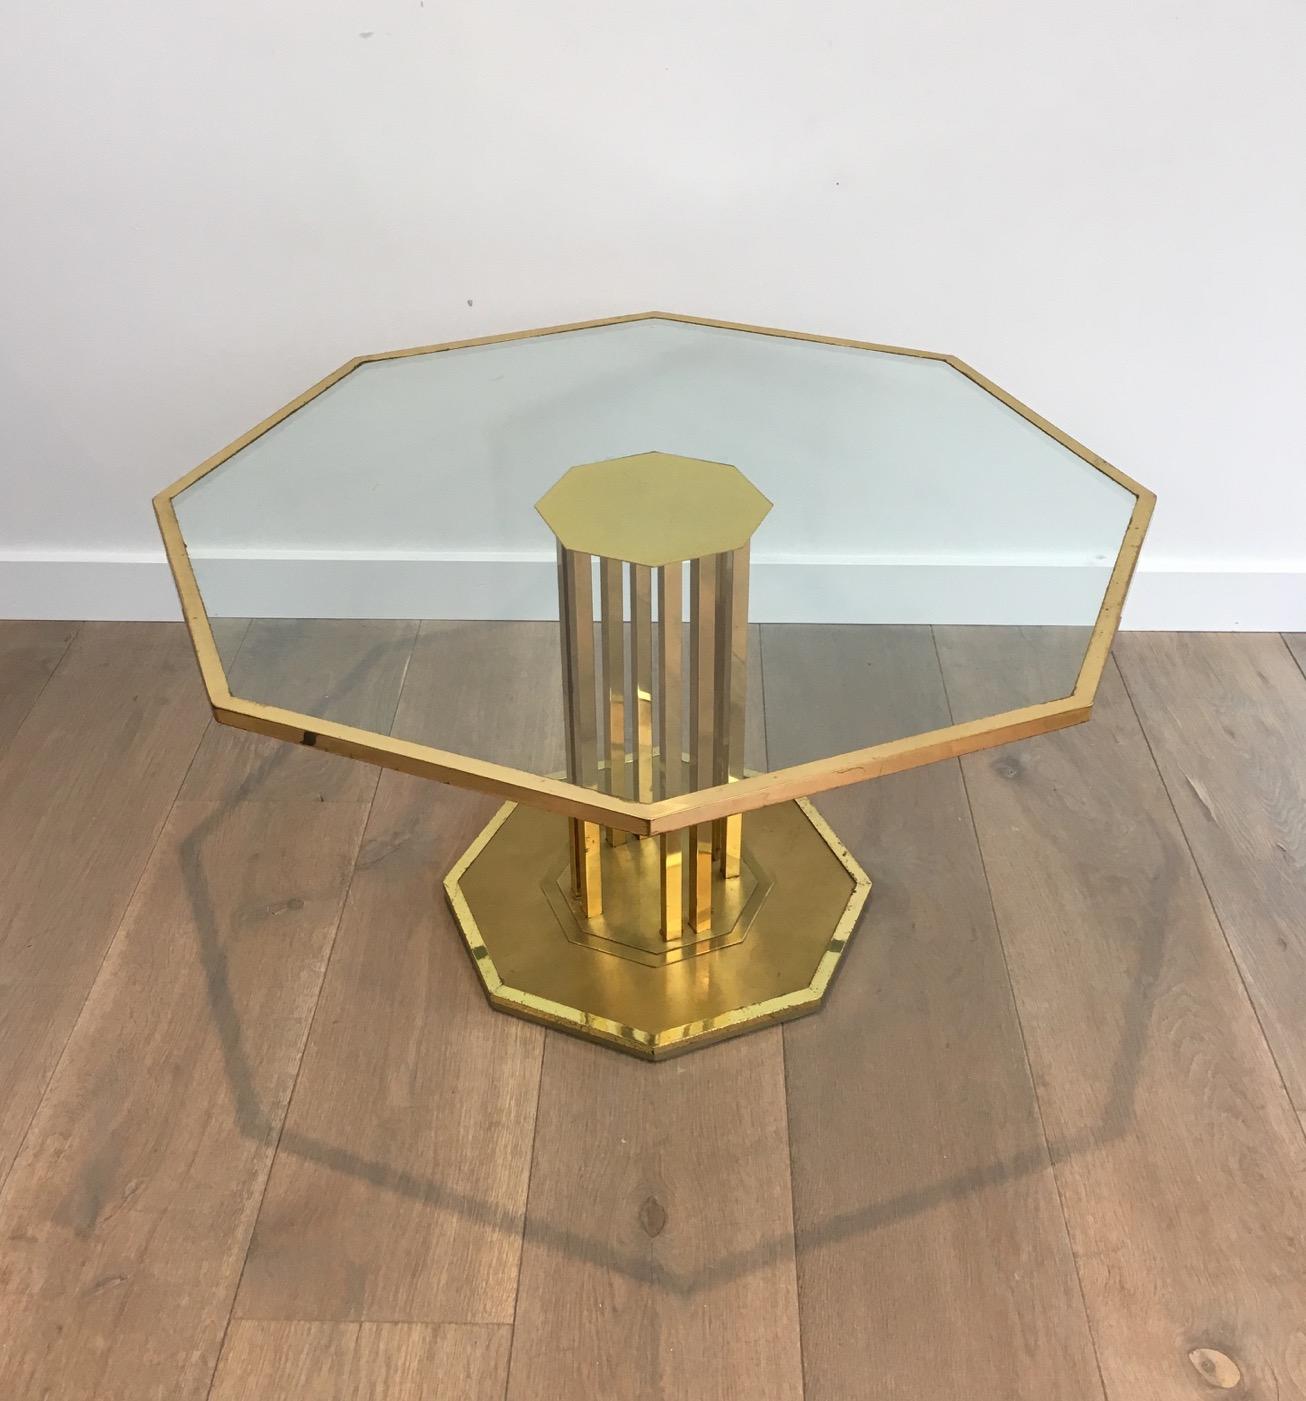 Rare Octagonal Brass and Glass Design Coffee Table, French, circa 1970 For Sale 8